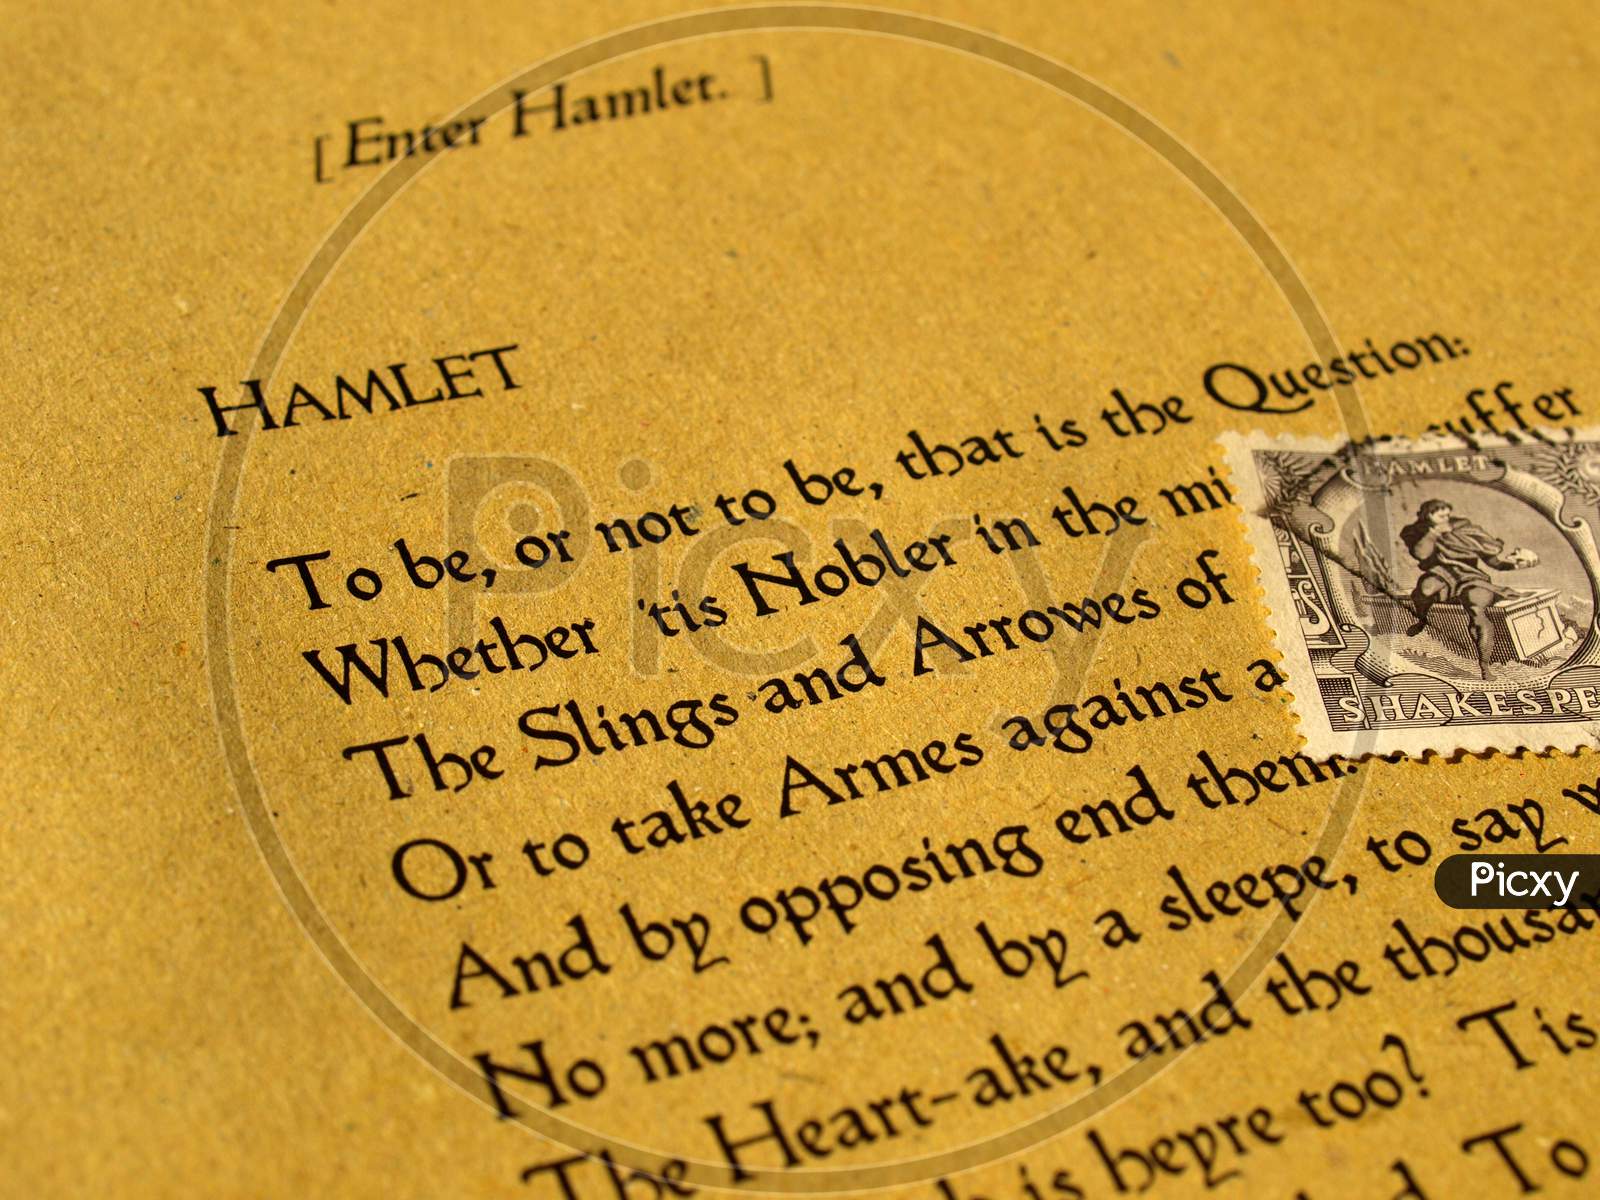 London, Uk - Circa 2009: William Shakespeare'S Hamlet (Original Middle English Text From The First Folio Of 1623) - Selective Focus